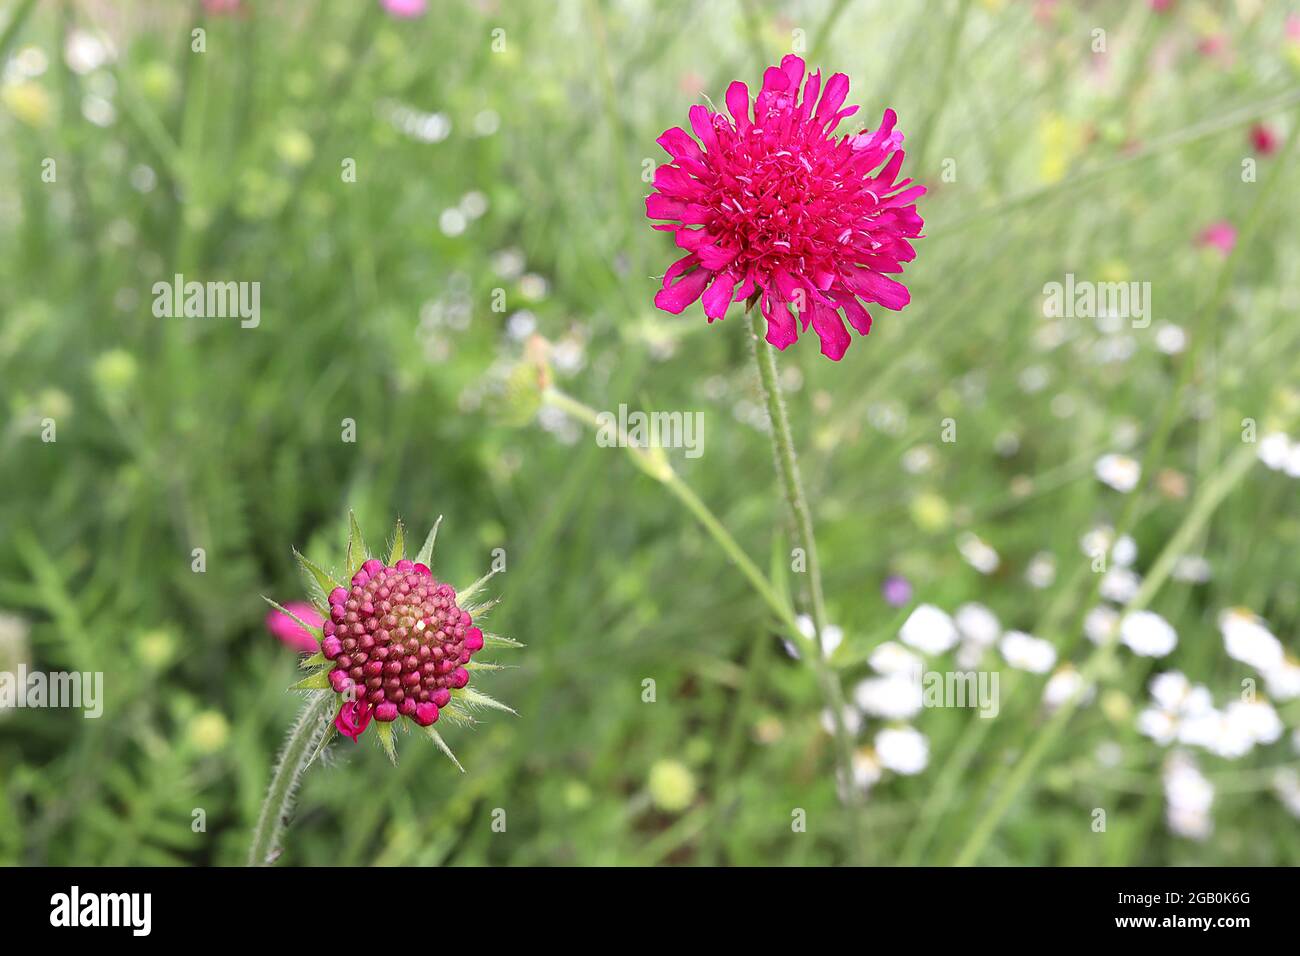 Knautia macedonica 'Red Knight' Macedonian scabious Red Knight – crimson red flowers with pincushion centre of ray florets, June, England, UK Stock Photo Alamy